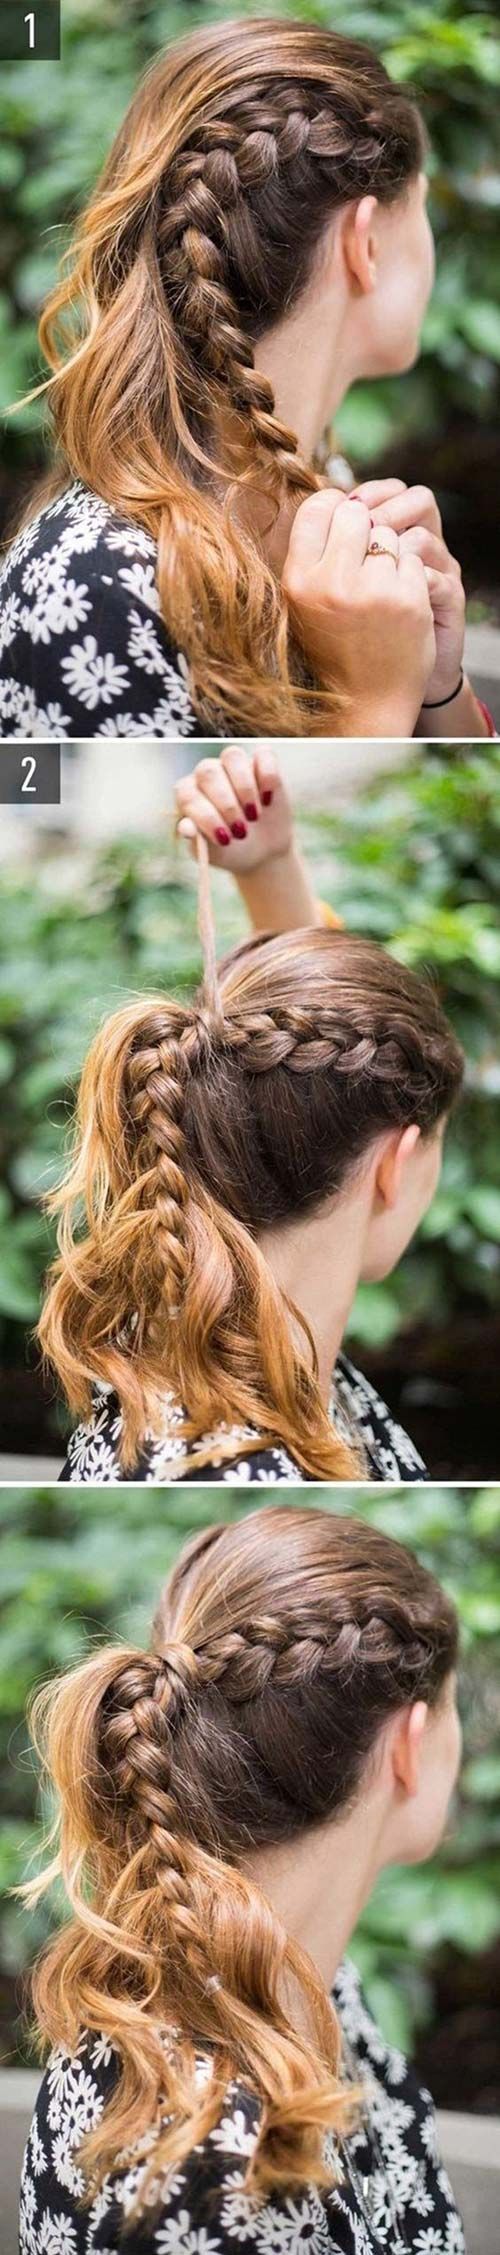 20 Awesome Hairstyles For Girls With Long Hair